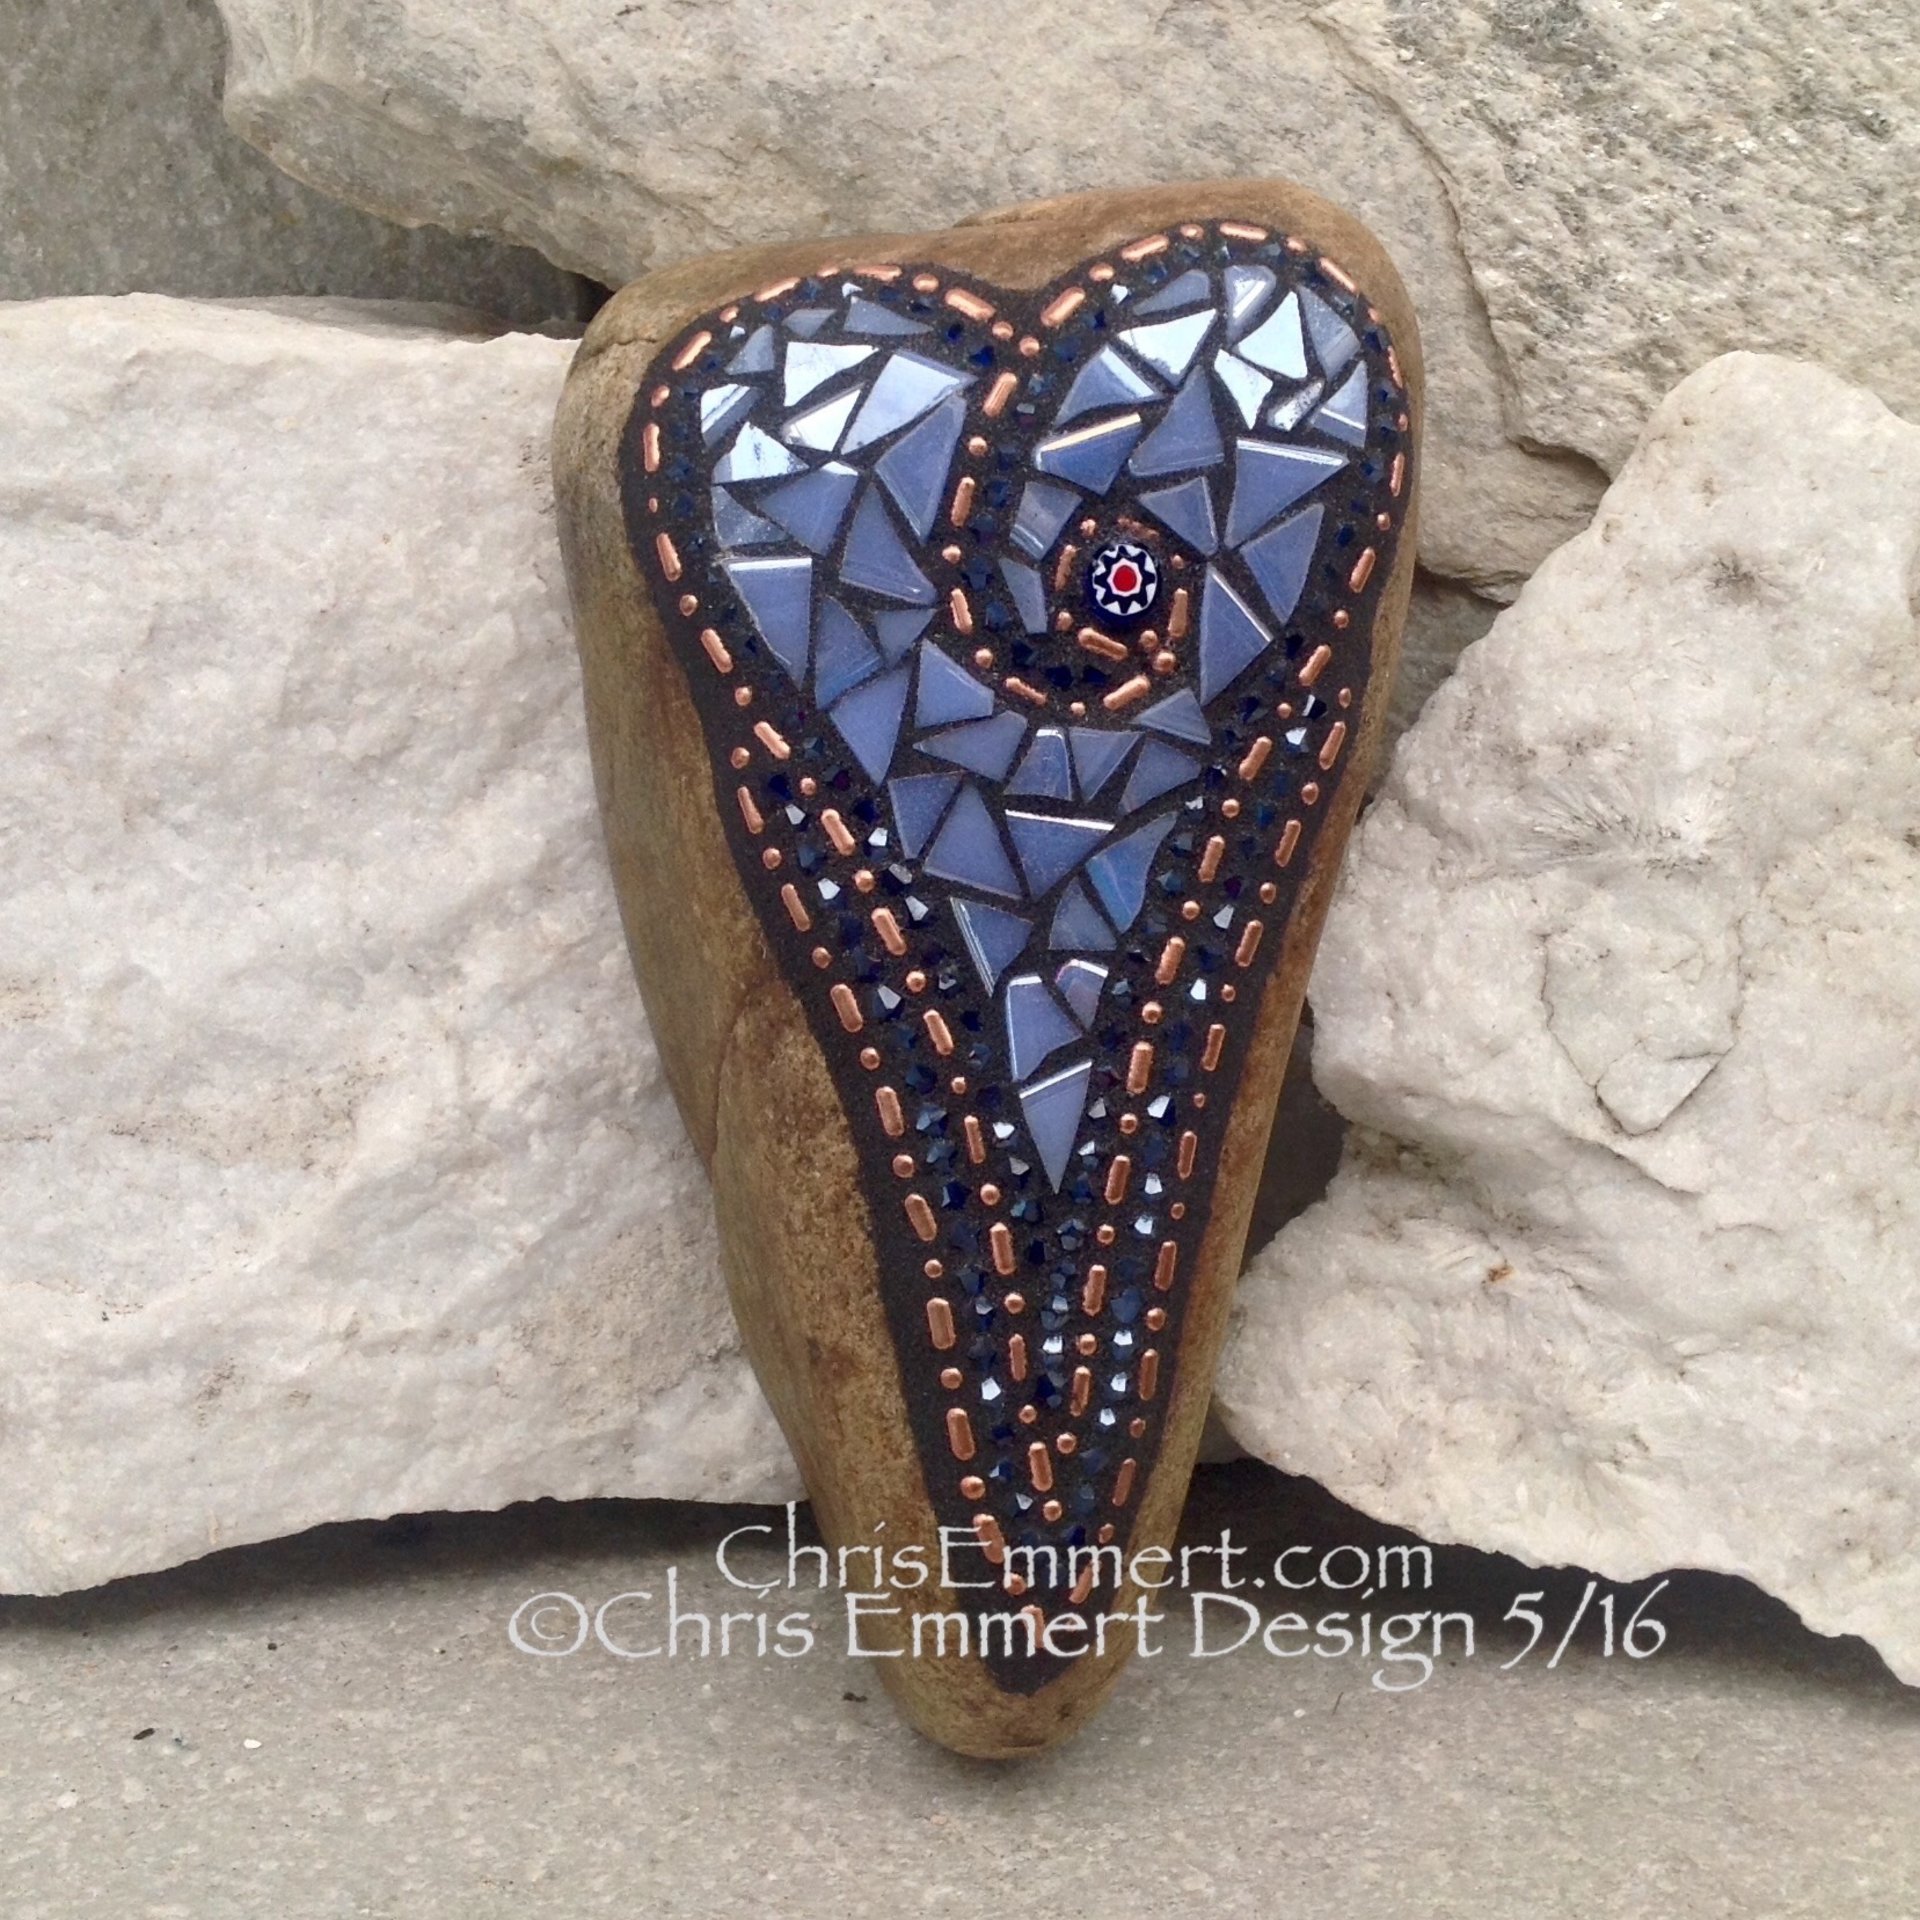 Copper and Blue ( Glow in the Dark) Heart -Mosaic / Garden Stone